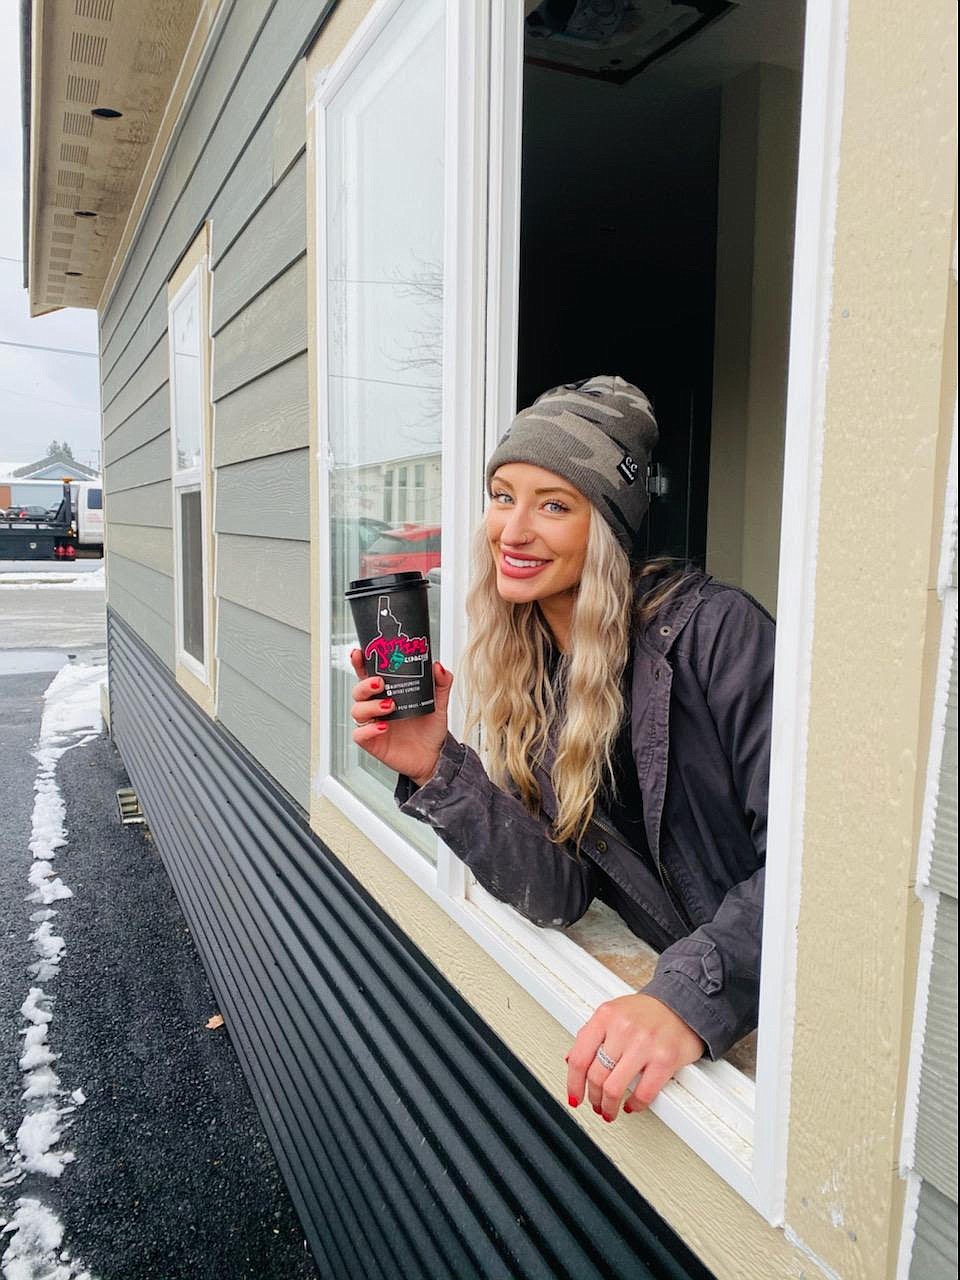 Courtesy photo
Jitterz Espresso manager Danielle Collinson poses at the local chain's newest coffee stand on the southwest corner of Spokane Street and Seltice Way in Post Falls.